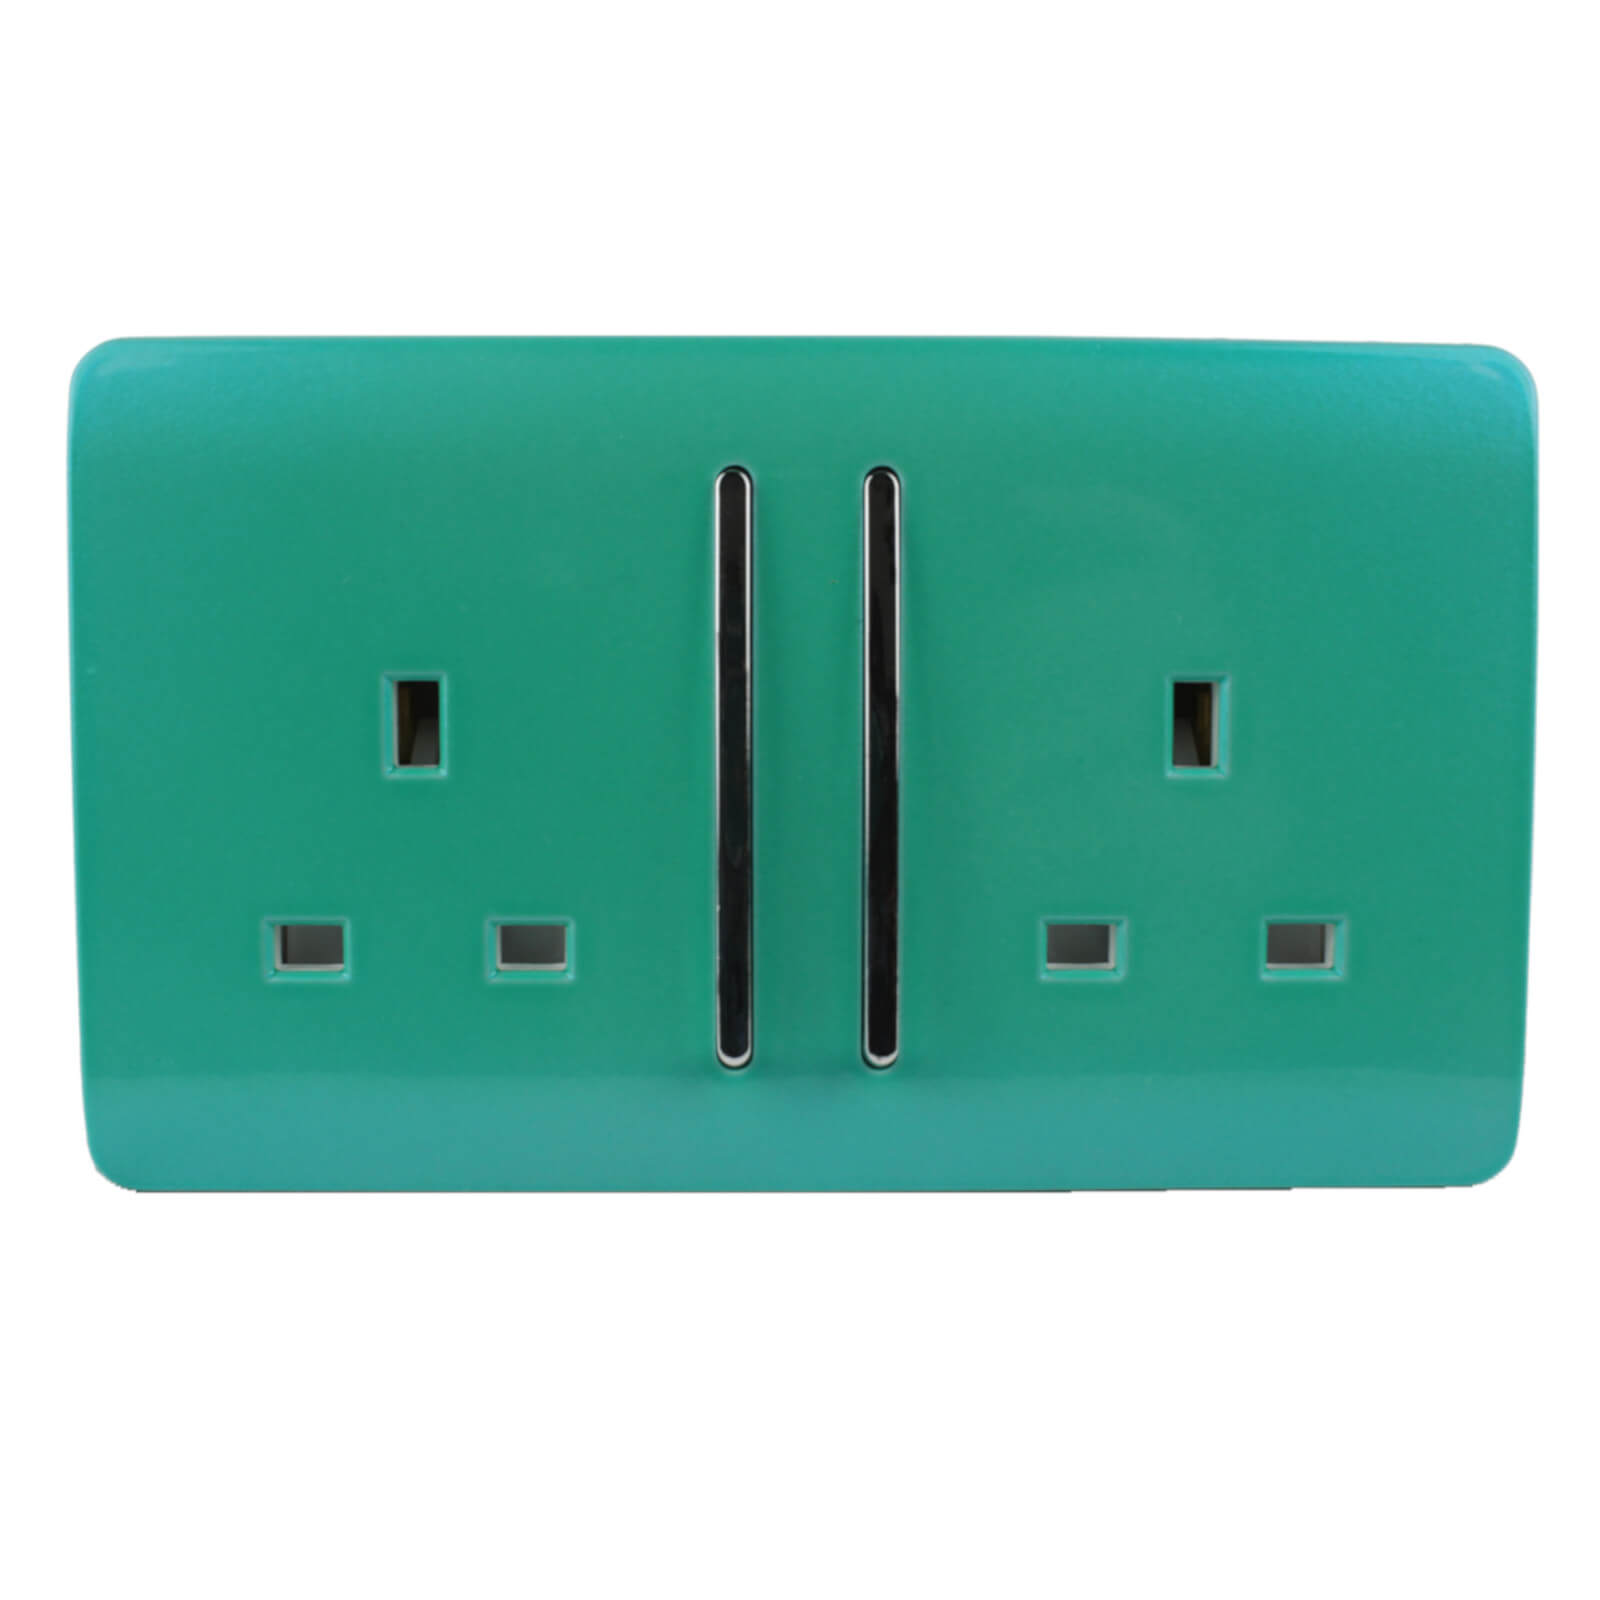 Trendi Switch 2 Gang 13A Long Switched Plug Socket in Screwless Teal